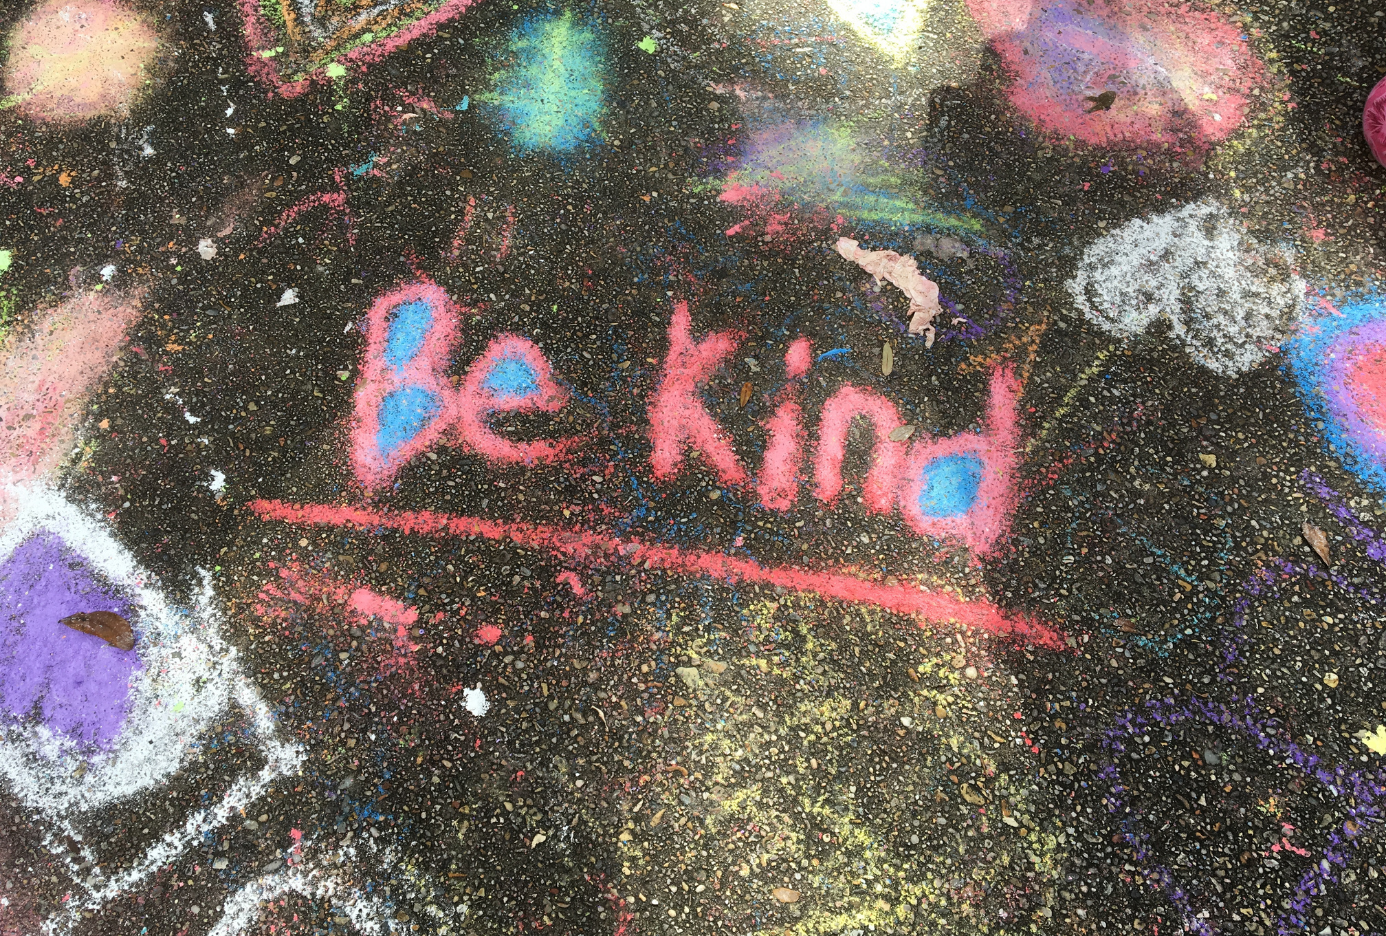 How to Teach Kids to Be Kind